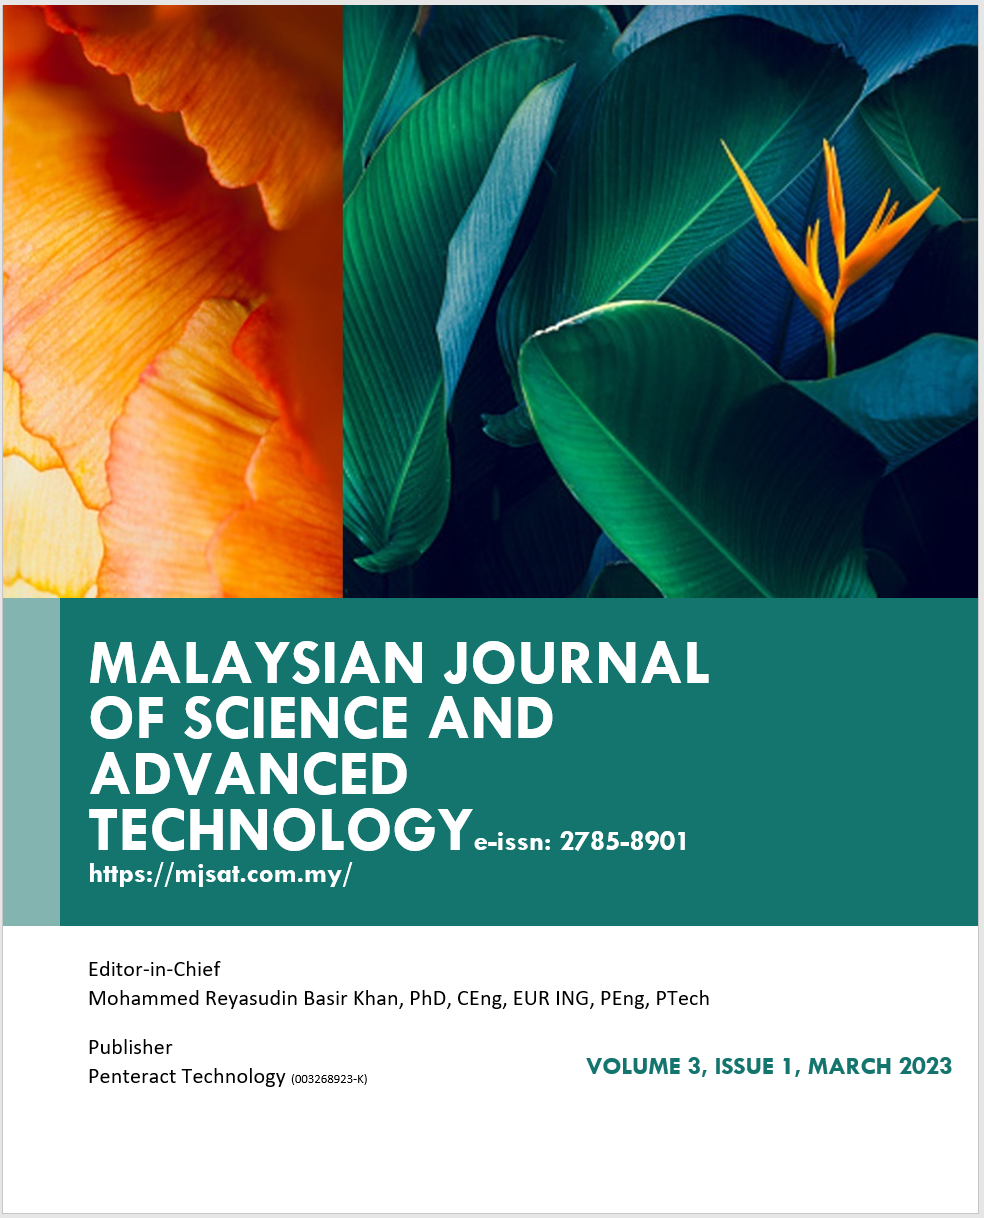 					View Volume 3, Issue 1, March 2023
				